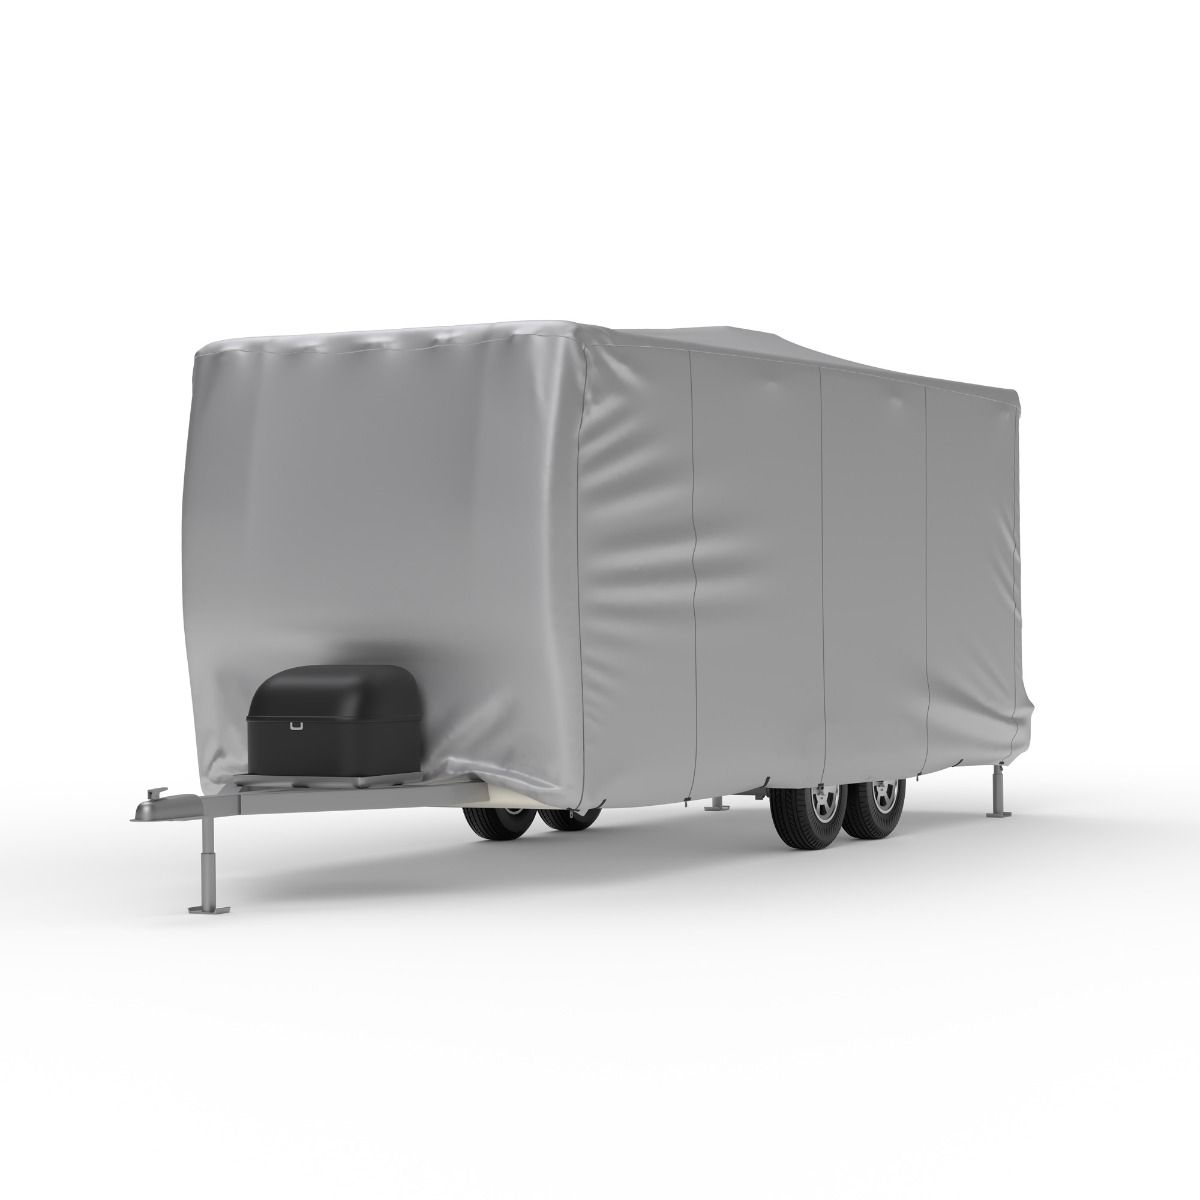 Platinum Shield Travel Trailer RV Cover (Fits 22.5' to 24.5' Long)